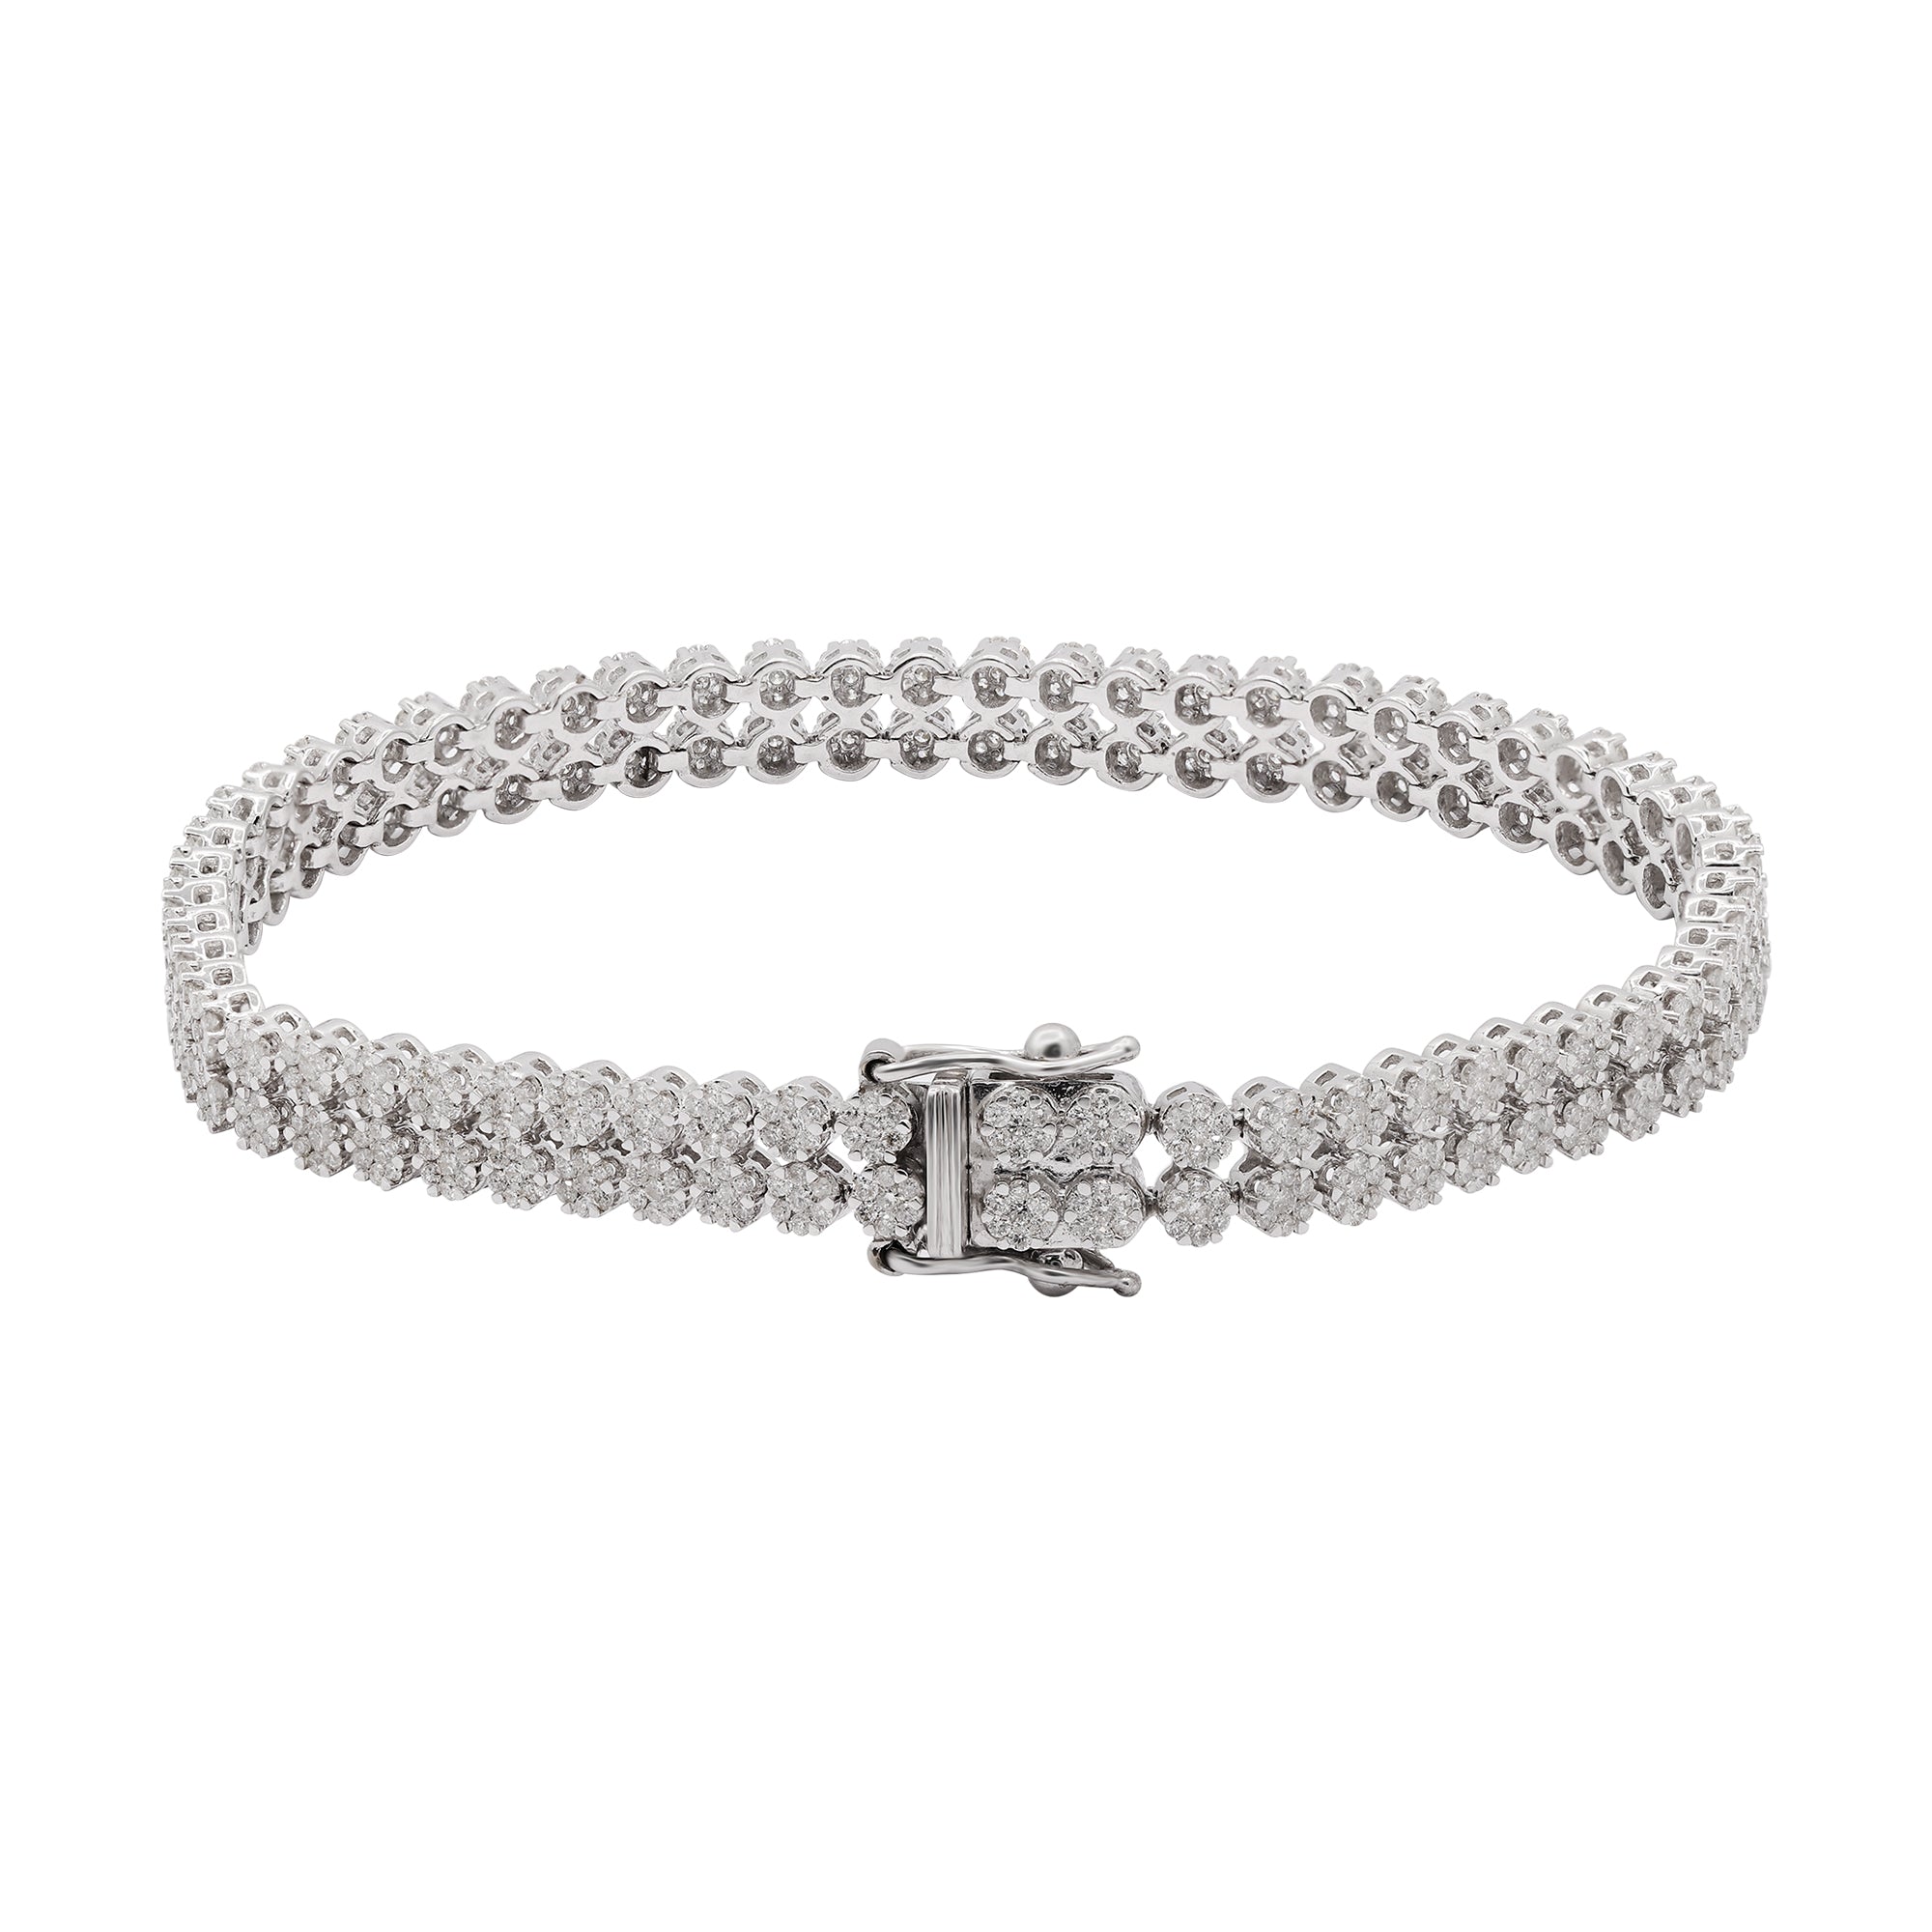 Tennis Bracelet 4.50 Ct Beautiful Real Diamond Tennis Bracelet Round Cut  14K White Gold F VS1 for Him for Her Apprasied and Certified - Etsy